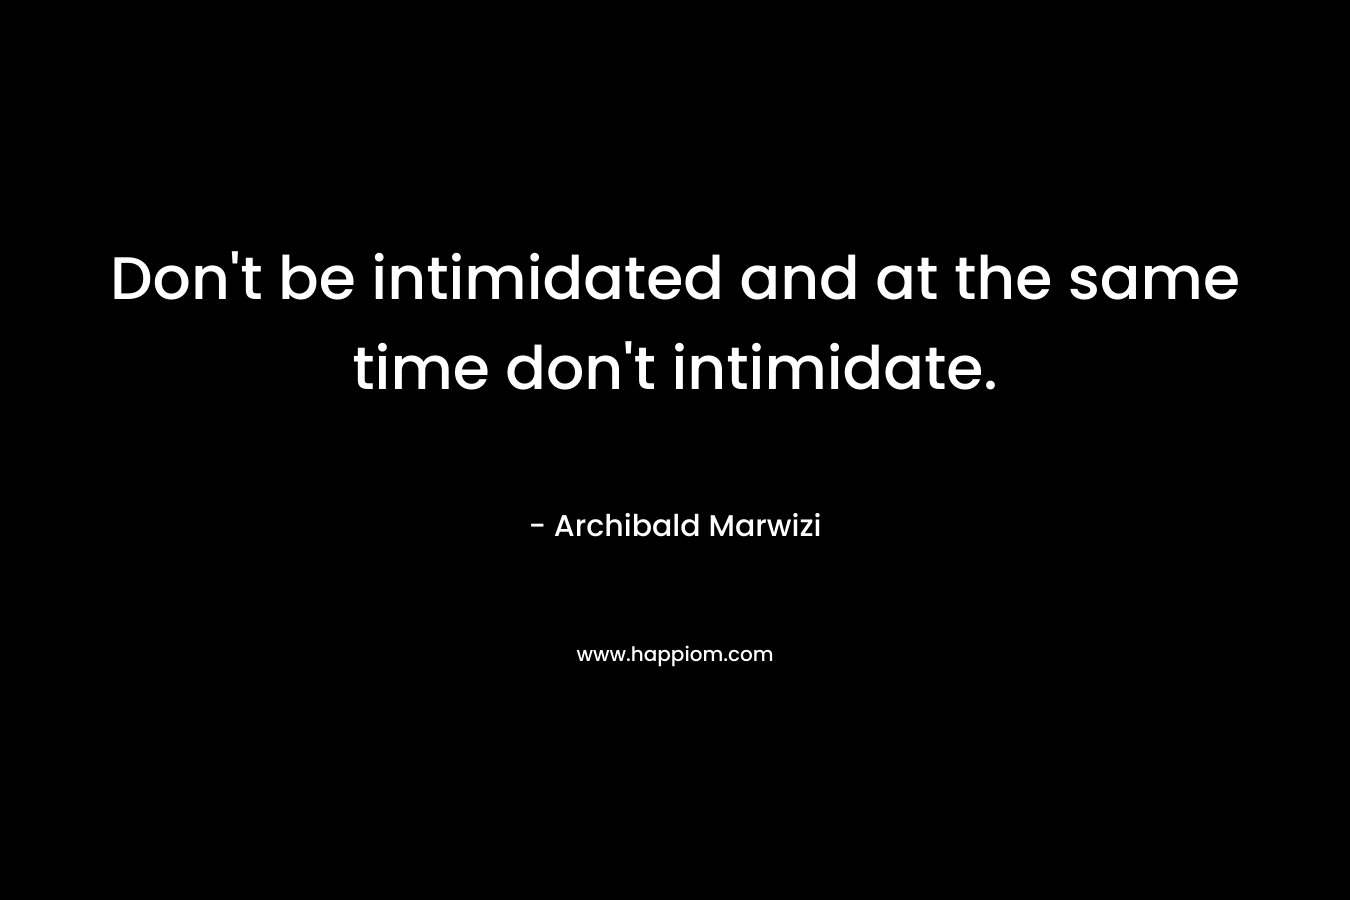 Don’t be intimidated and at the same time don’t intimidate. – Archibald Marwizi